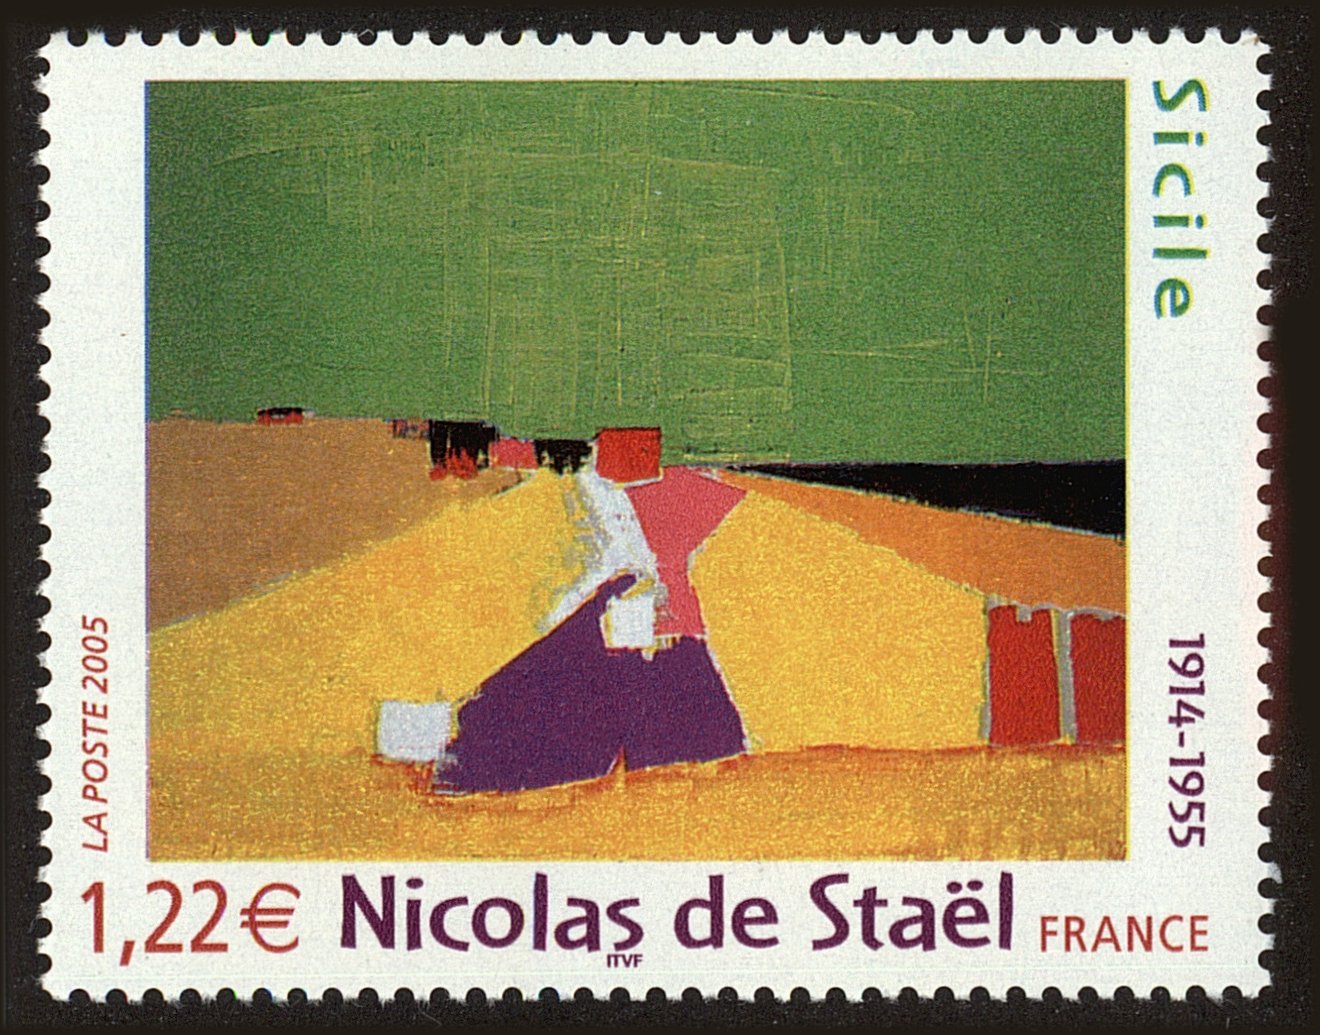 Front view of France 3100 collectors stamp